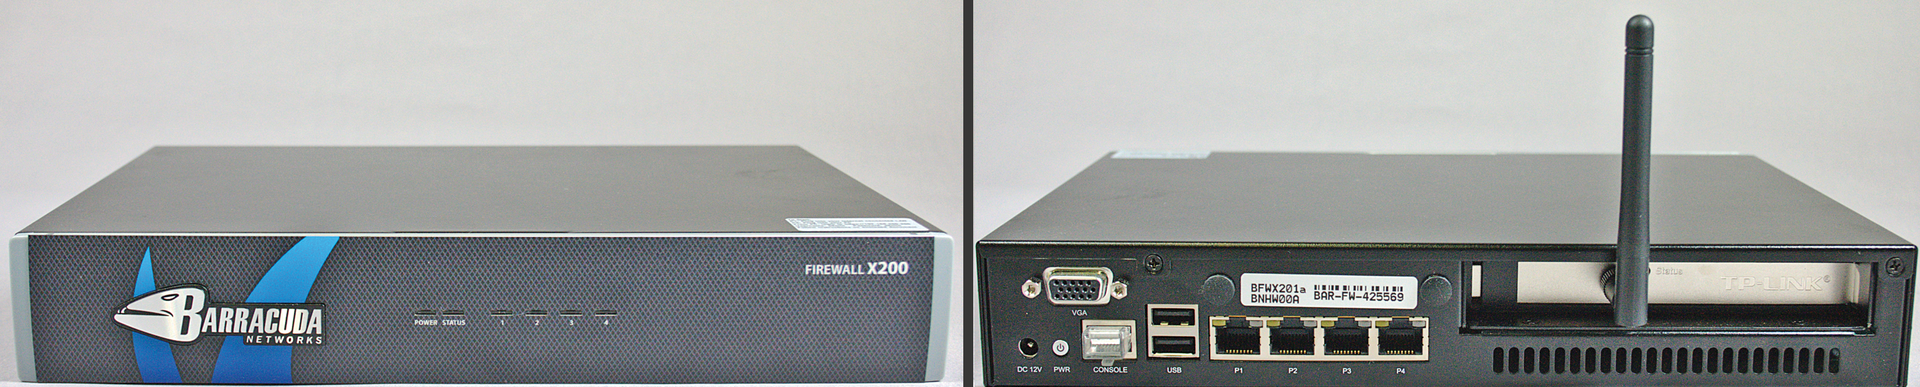 The X200 model (left) is the smallest in the new Barracuda firewall series. The X201 version (right) has a wireless interface. 